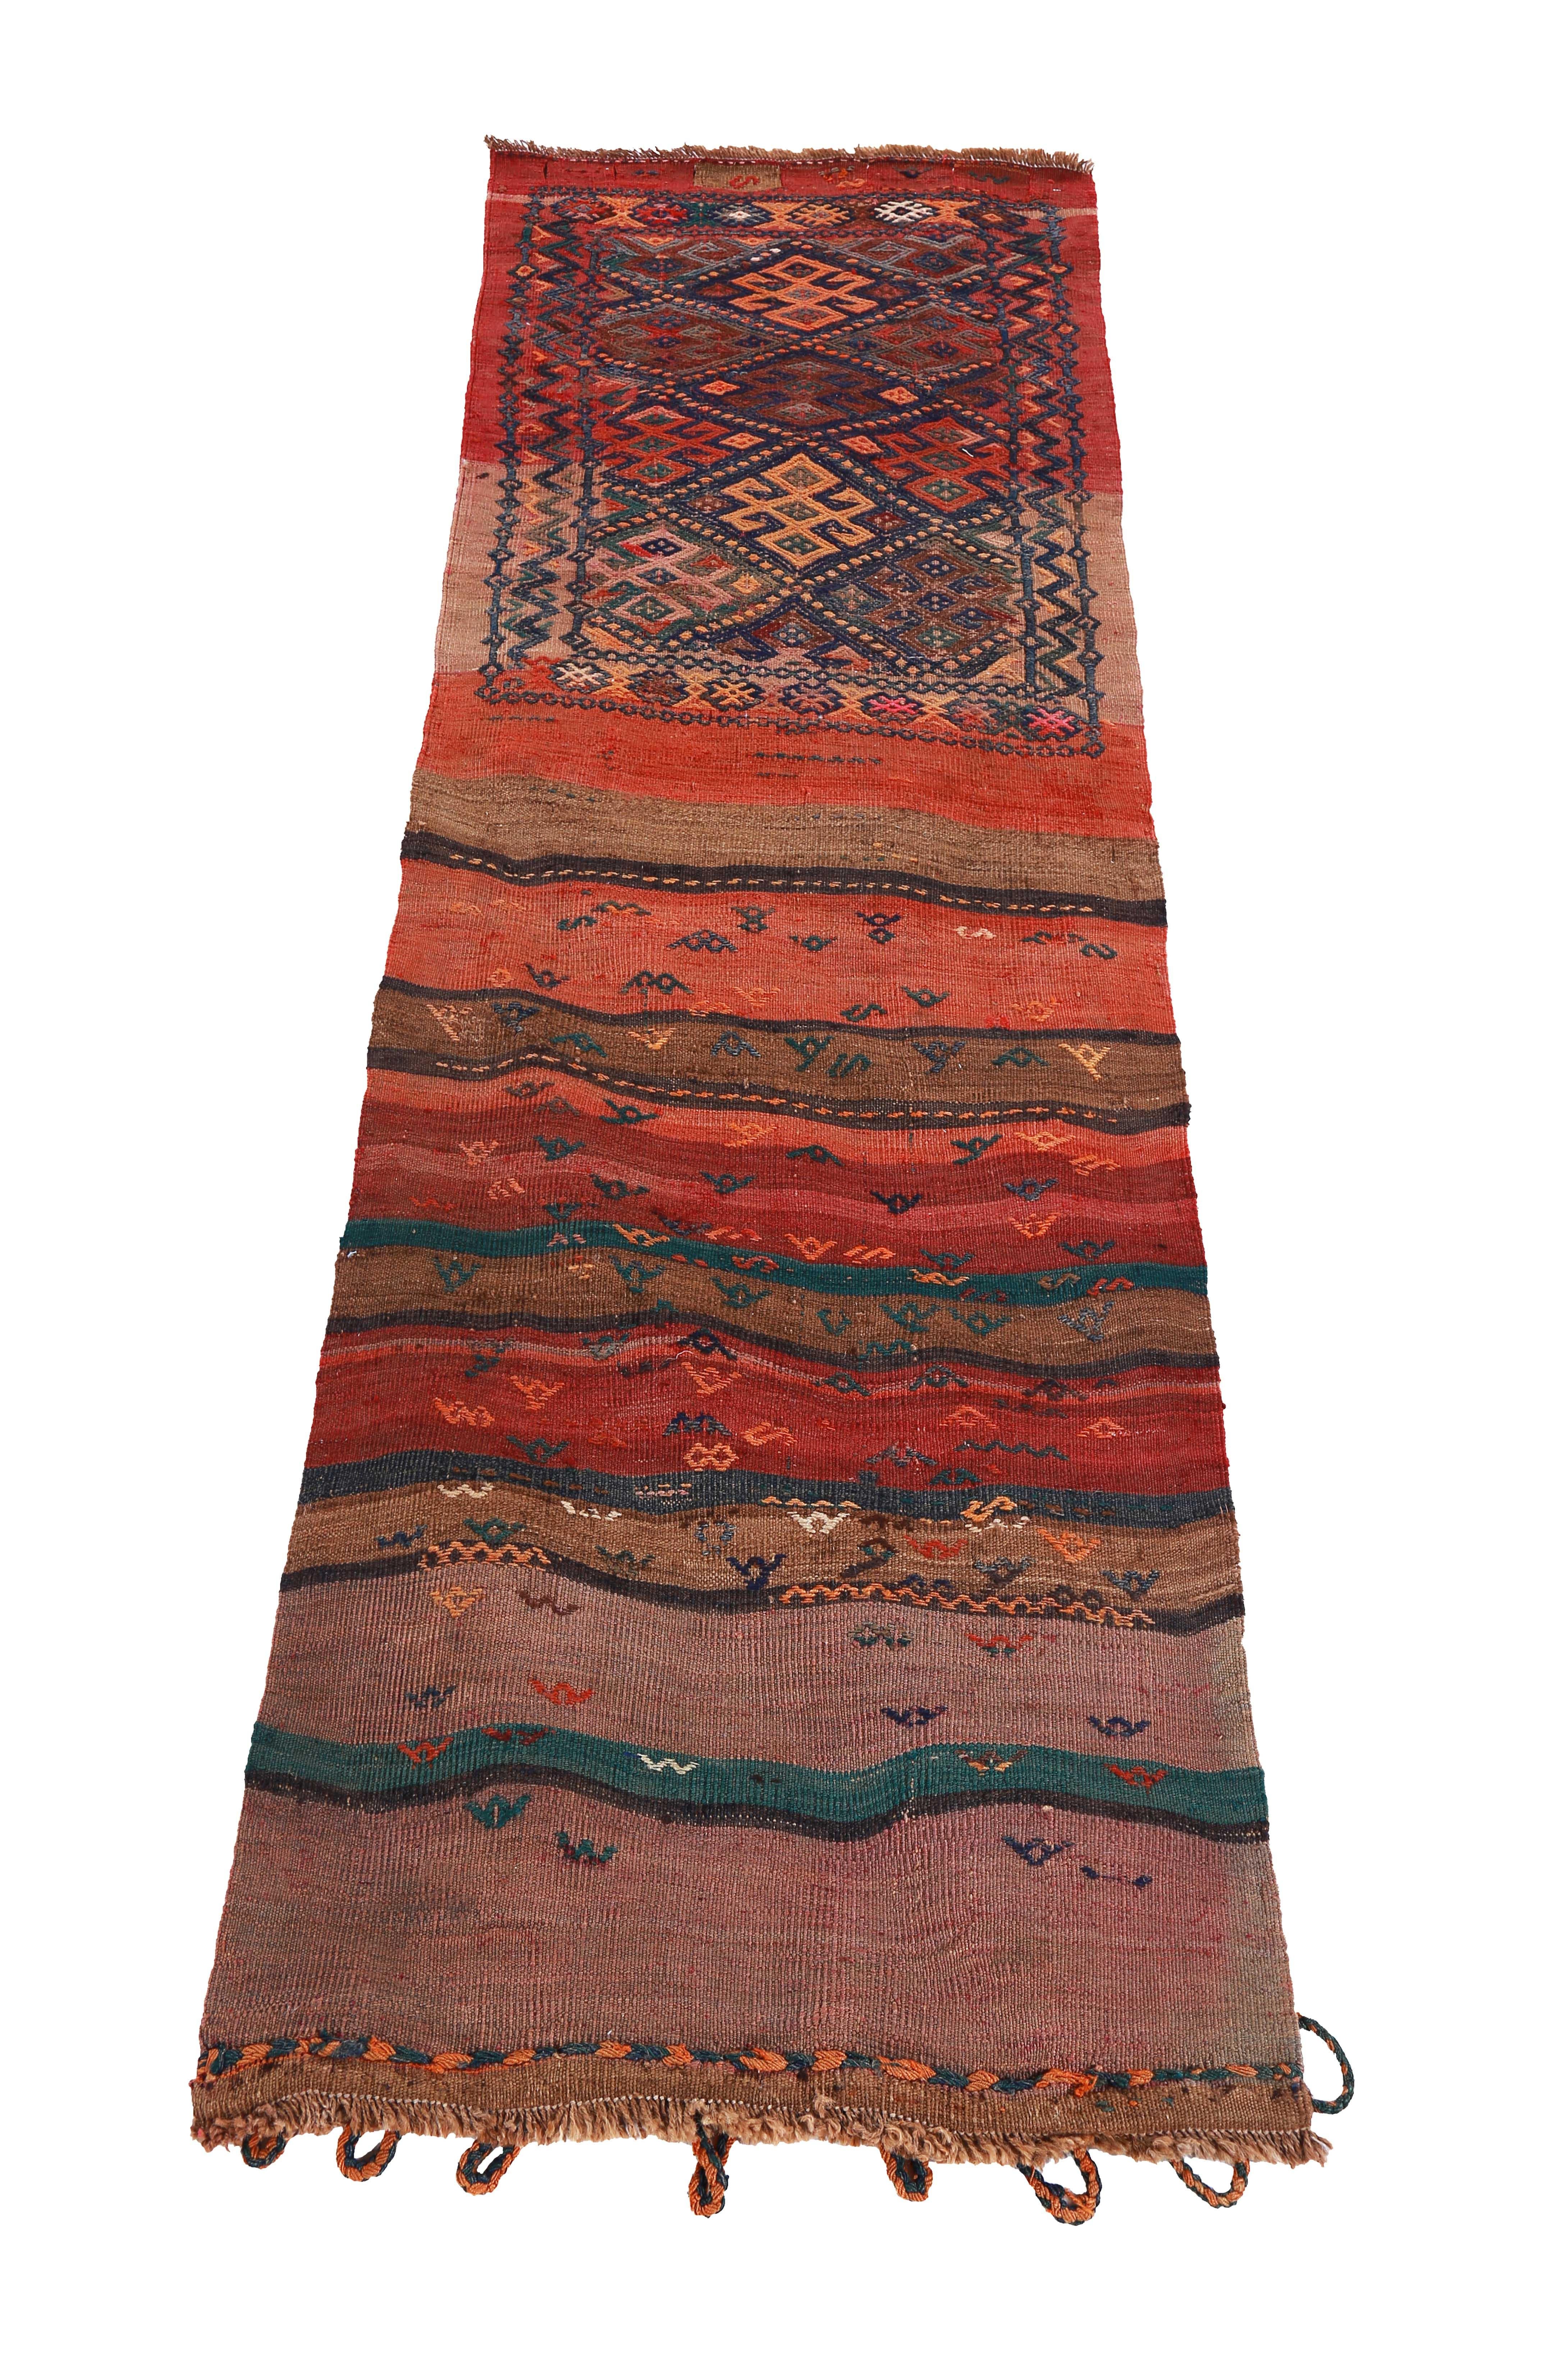 Turkish rug handwoven from the finest sheep’s wool and colored with all-natural vegetable dyes that are safe for humans and pets. It’s a traditional Kilim flat-weave design featuring a red and orange field with tribal stripes in green and brown.